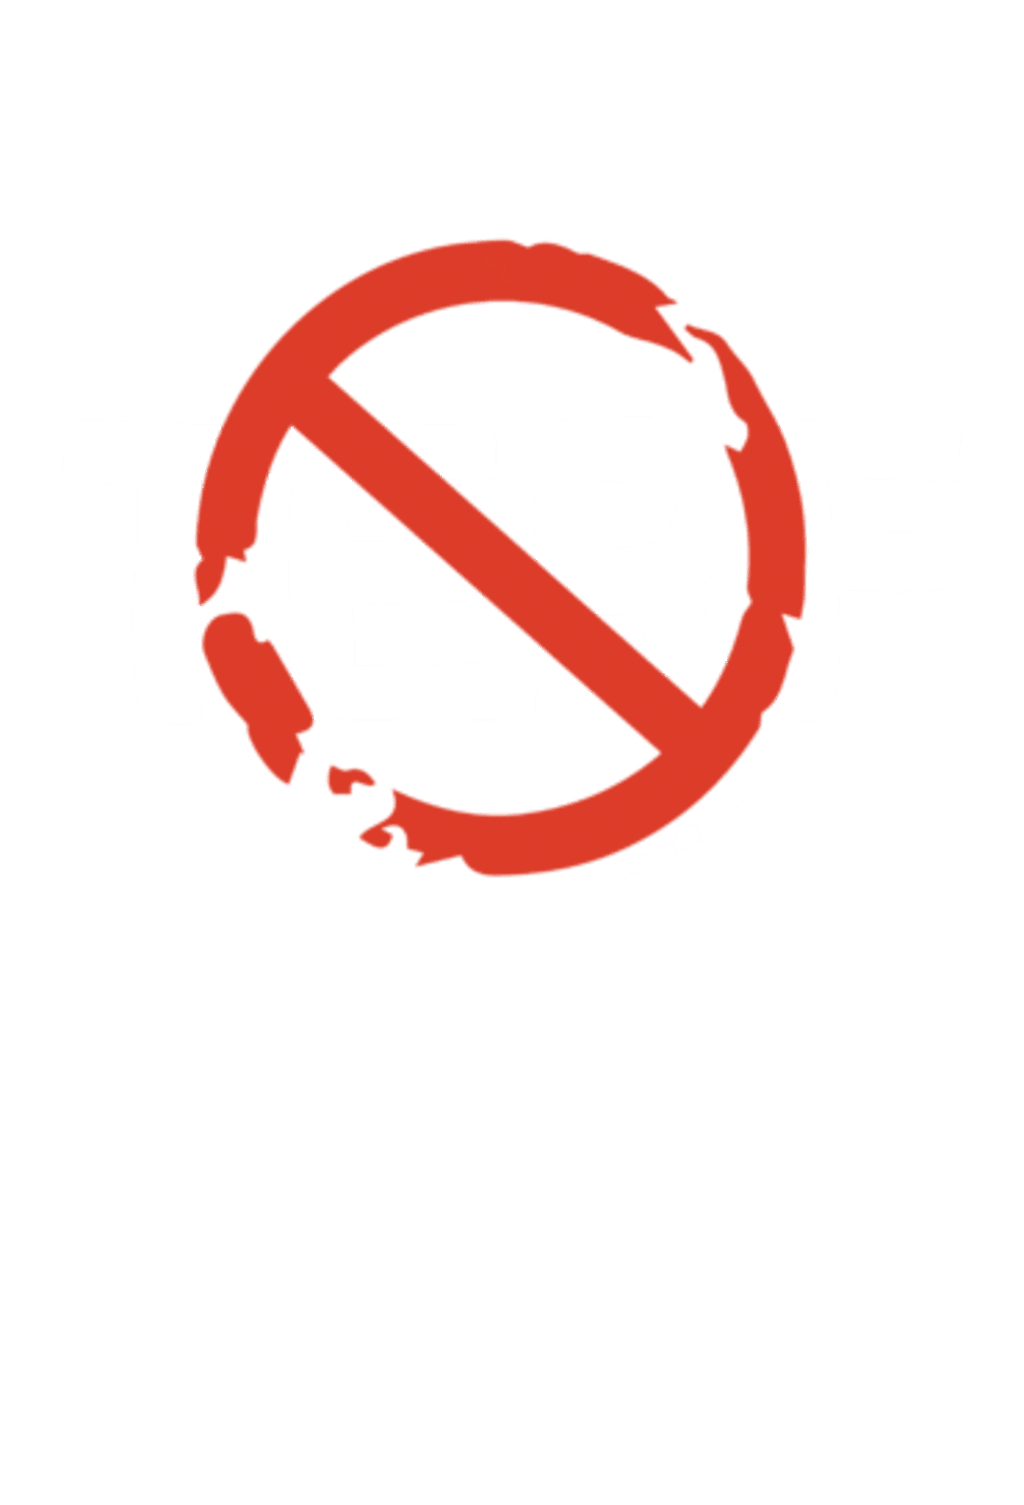 TERF not allowed [vr. bianco]